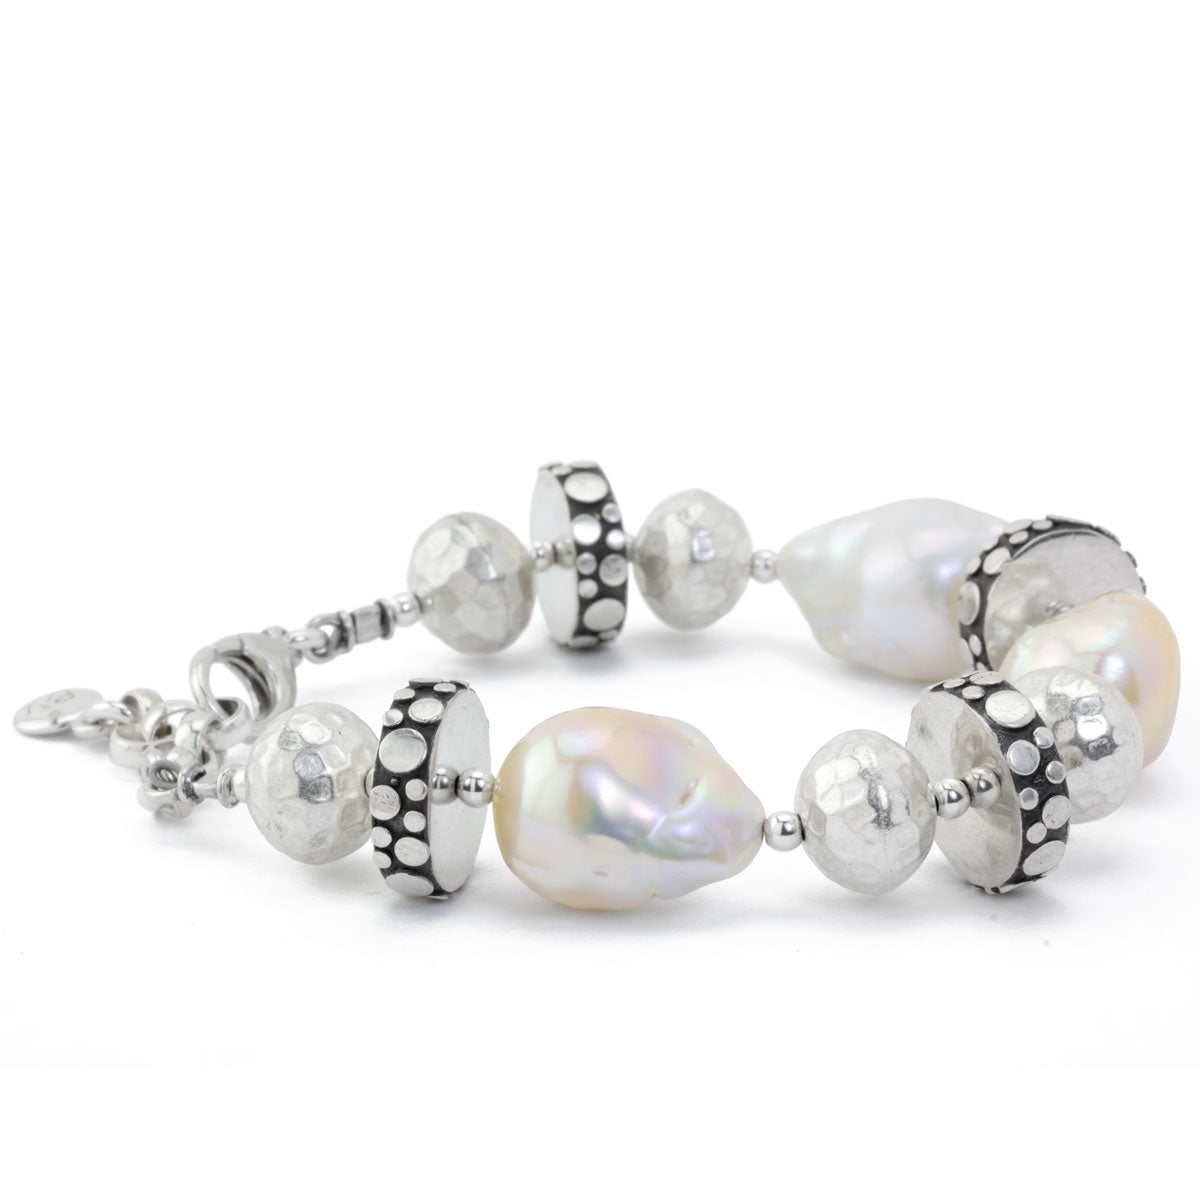 The Goddess Collection Baroque Pearl Bracelet